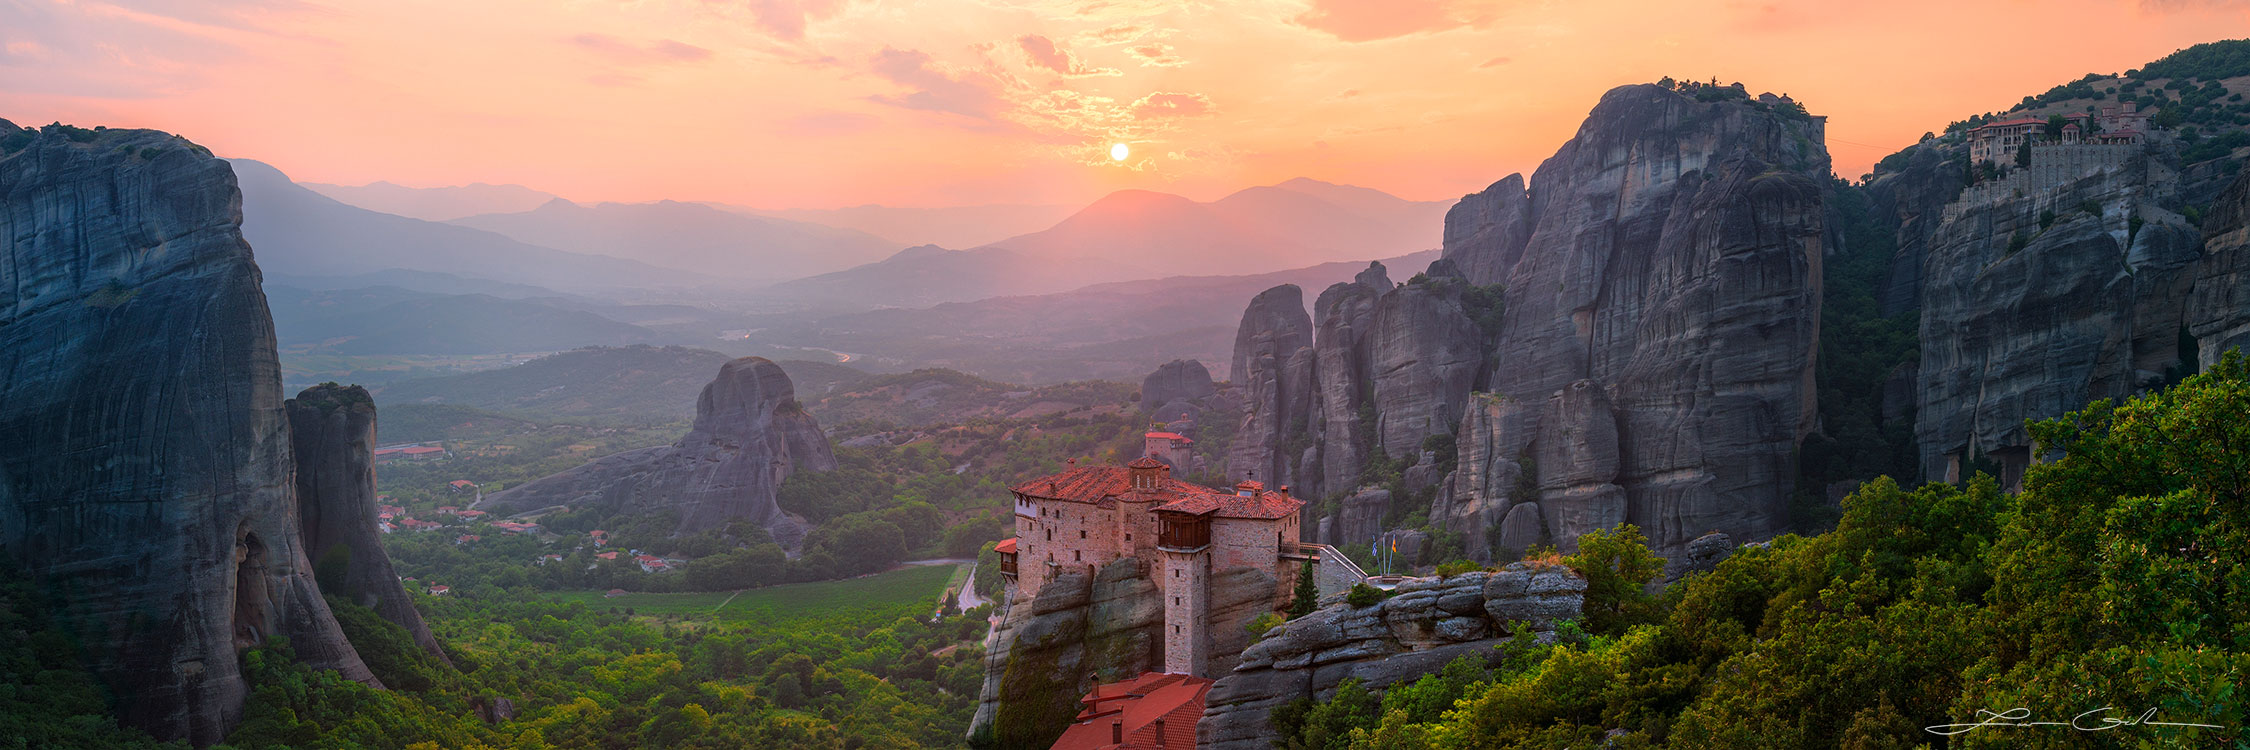 A monastery on top of a cliff with the setting sun in the distance, Meteora, Greece